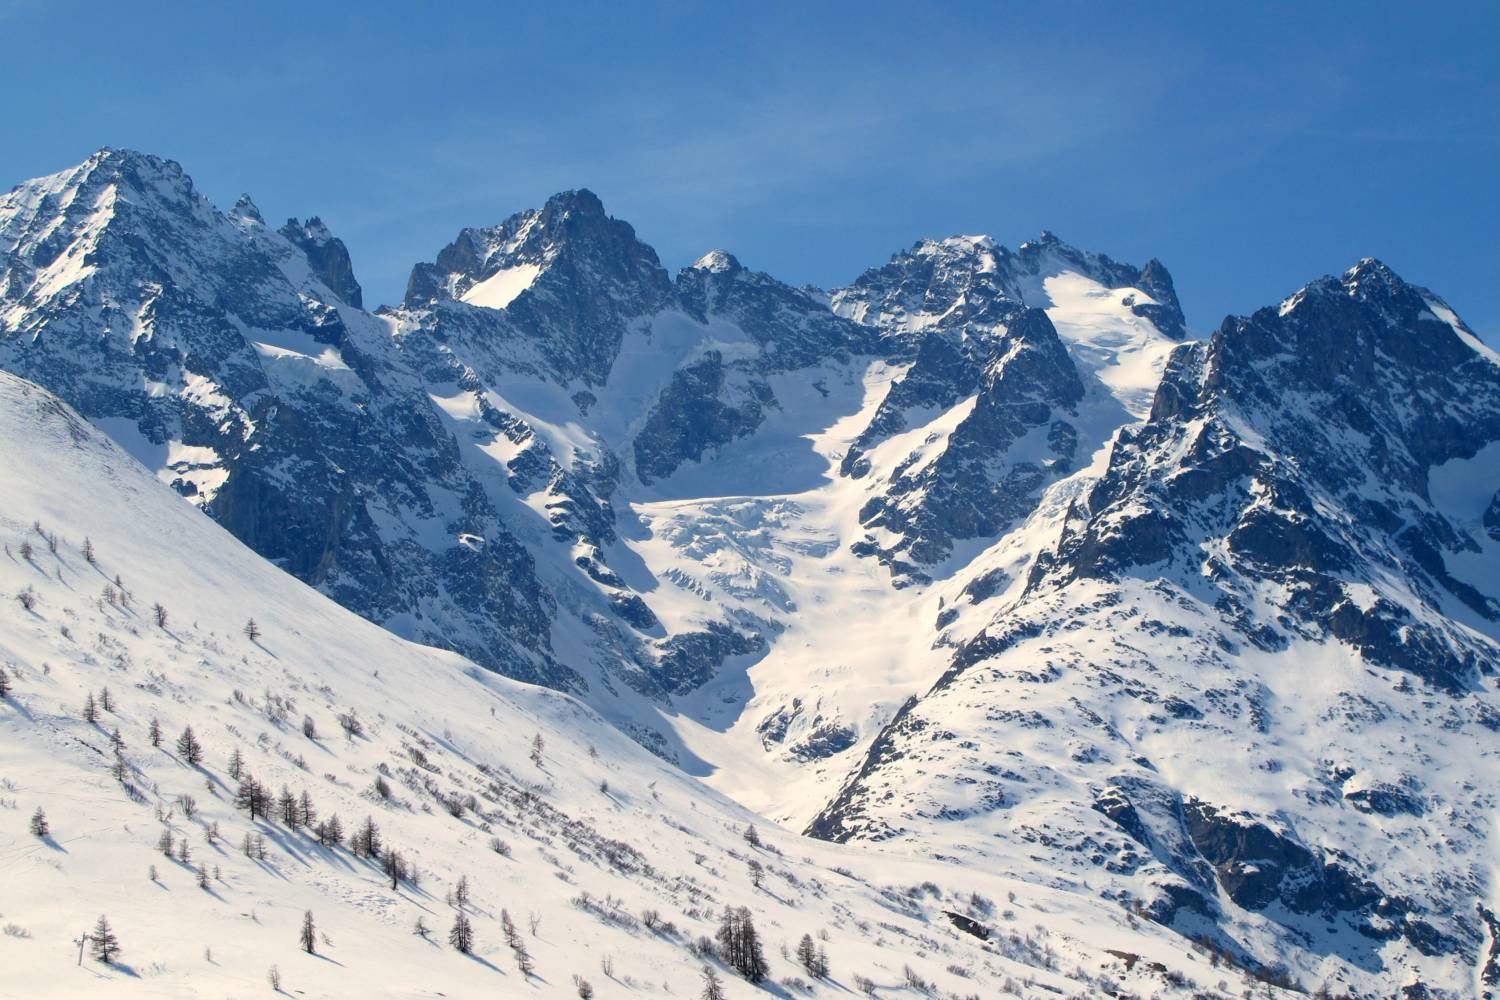 Enjoy a private chef after an amazing ski day in French Alps - Take a Chef